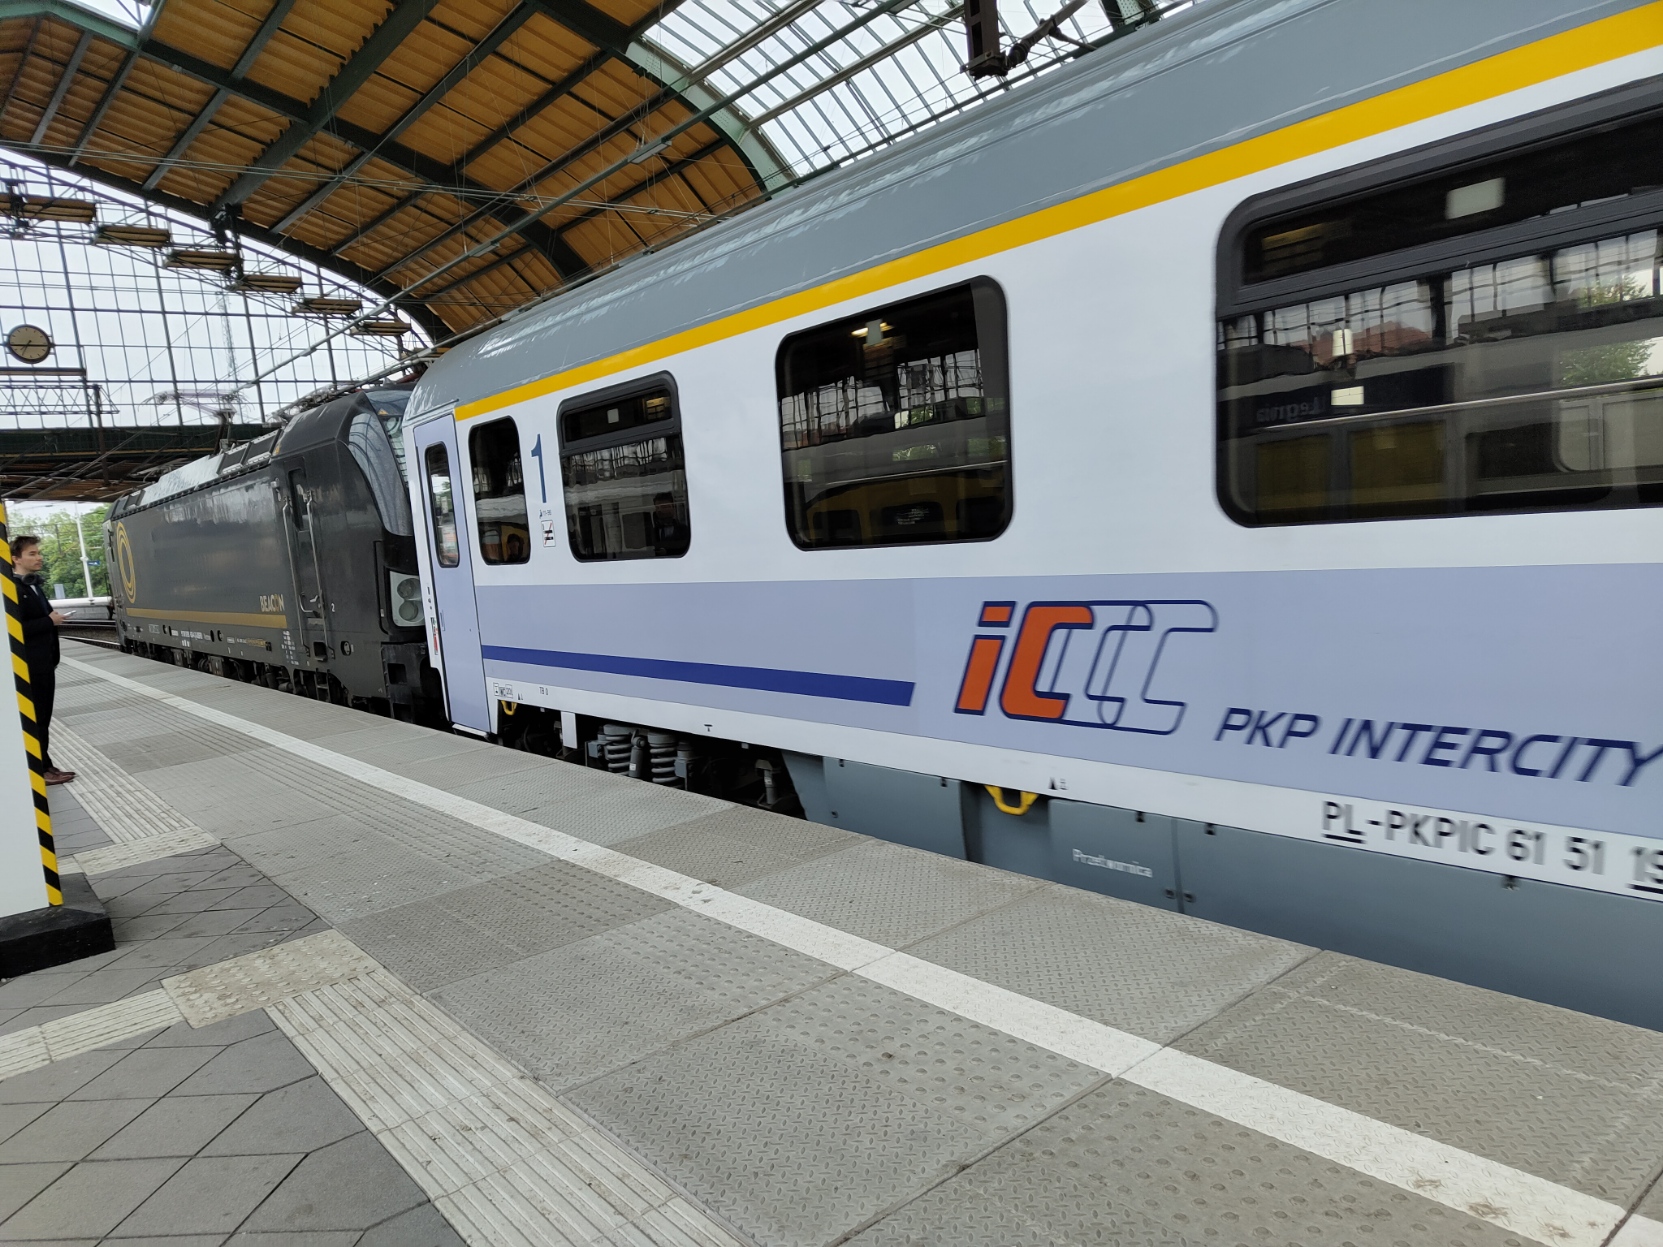 Black Vectron locomotive and a first class PKP Intercity UIC-Z carriage